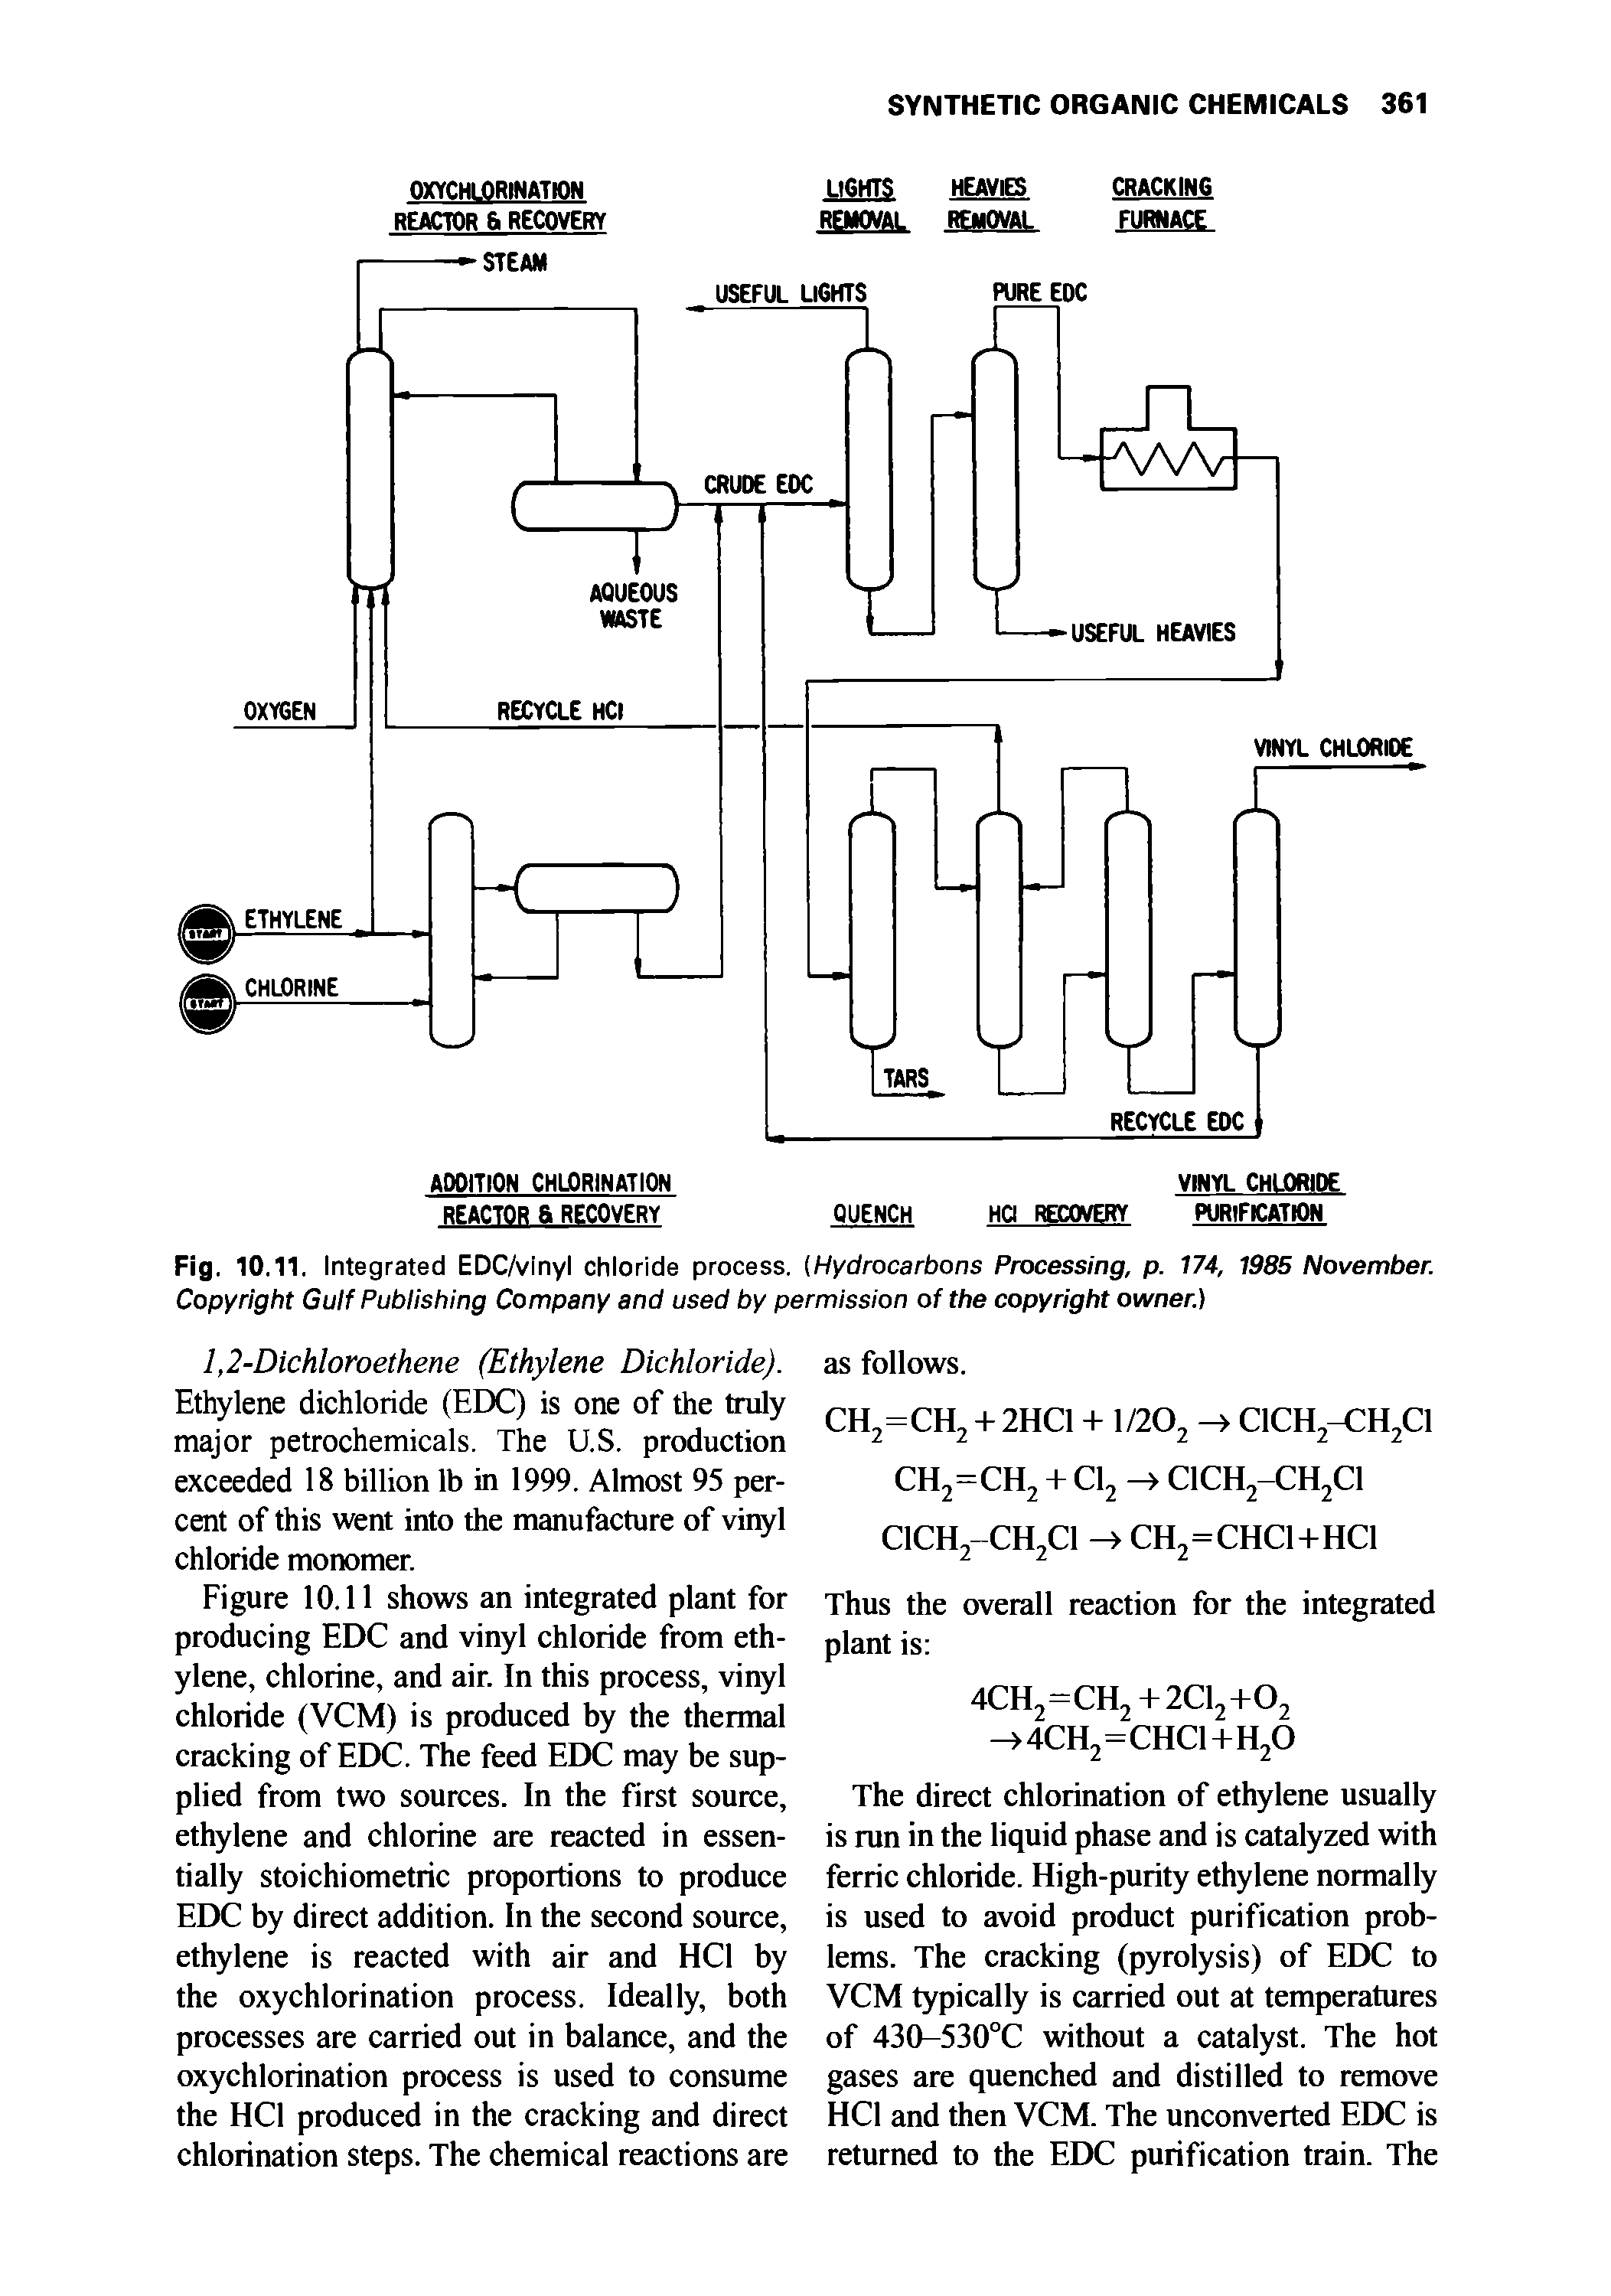 Fig. 10.11. Integrated EDC/vinyl chloride process. (Hydrocarbons Processing, p. 174, 1985 November. Copyright Gulf Publishing Company and used by permission of the copyright owner.)...